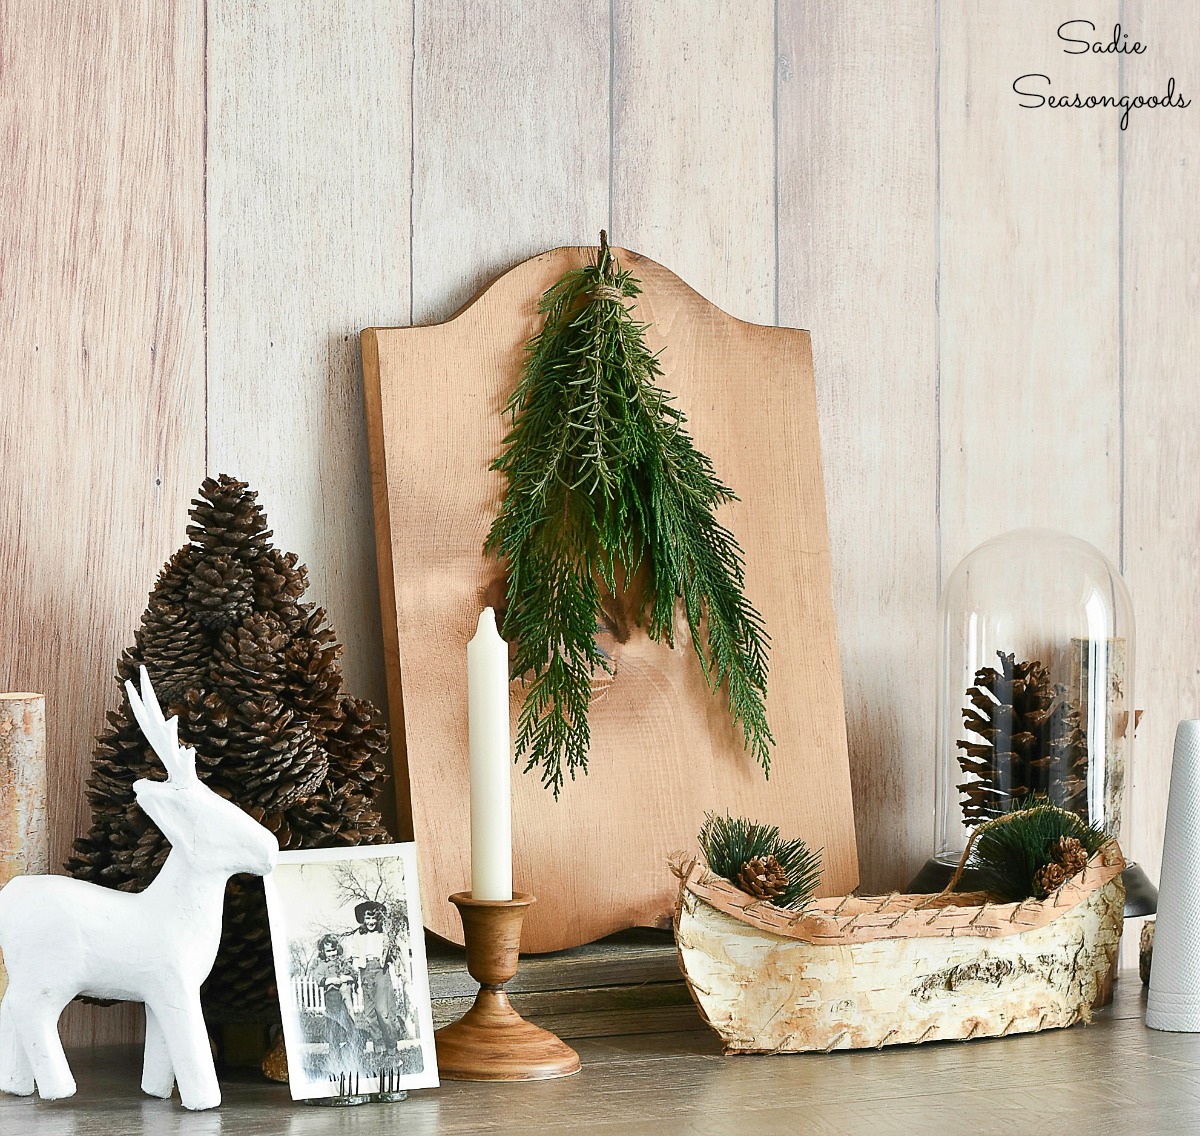 https://www.sadieseasongoods.com/wp-content/uploads/2020/01/Winter-cabin-or-log-cabin-decor-that-is-rustic-chic-and-came-from-the-thrift-store-with-upcycling.jpg